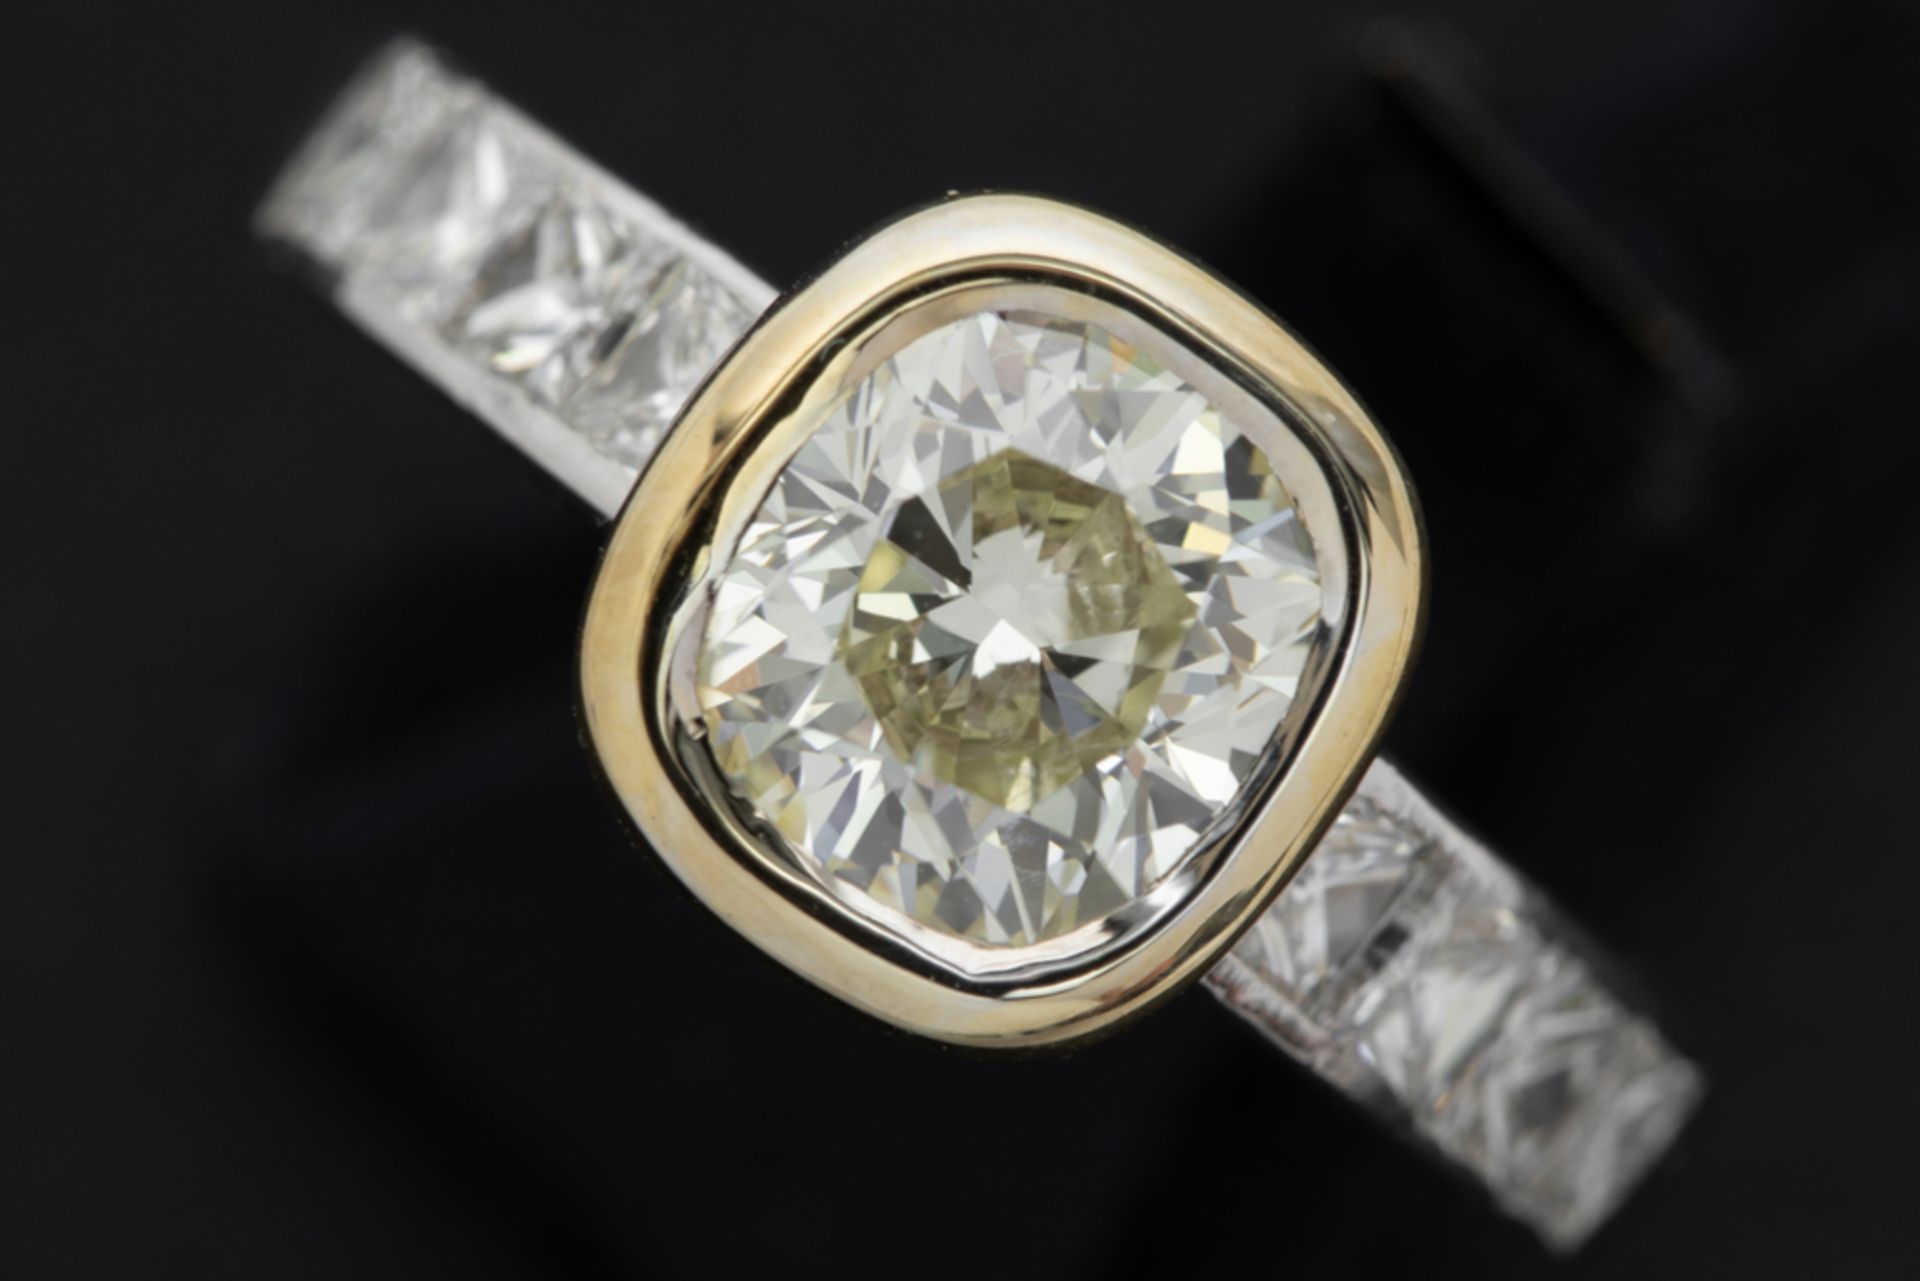 a 1,76 carat "natural light yellow fancy" high quality brilliant cut diamond set in yellow gold (